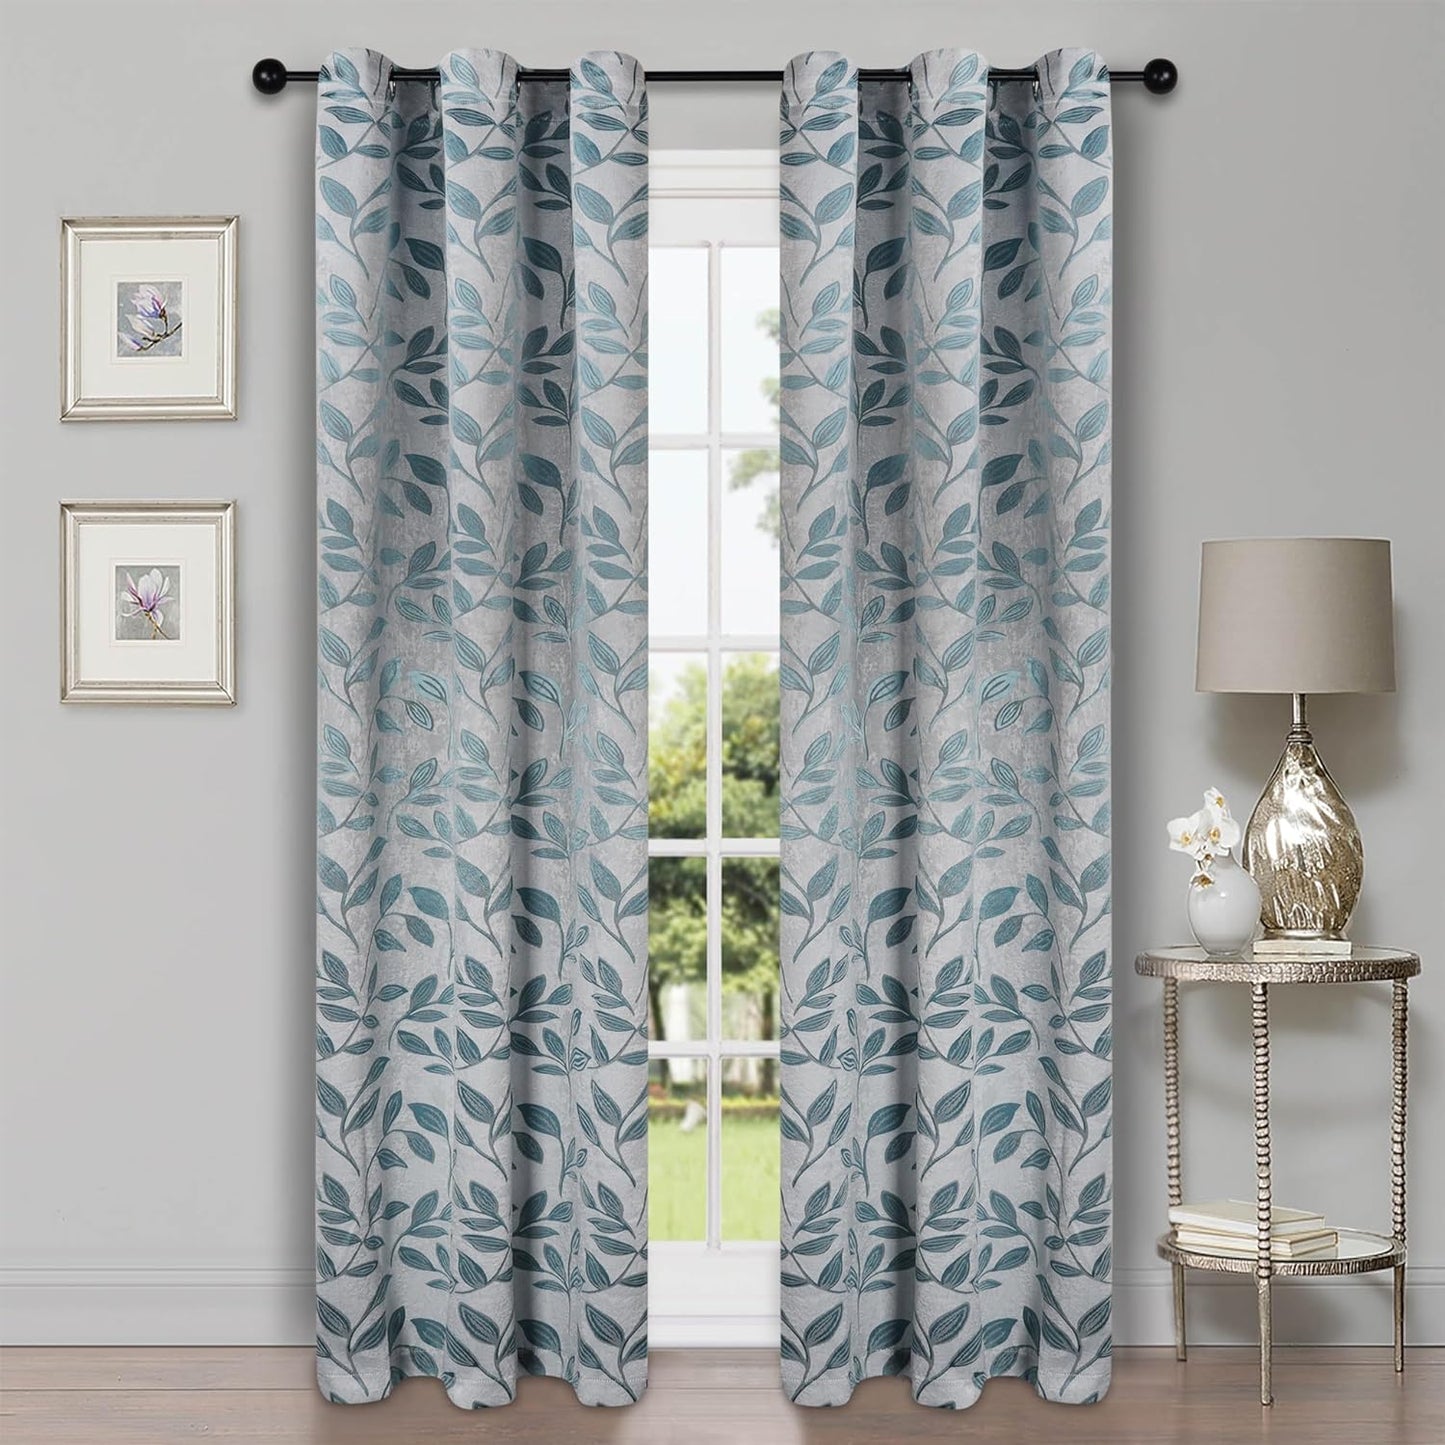 Superior Blackout Curtains, Room Darkening Window Accent for Bedroom, Sun Blocking, Thermal, Modern Bohemian Curtains, Leaves Collection, Set of 2 Panels, Rod Pocket - 52 in X 63 In, Nickel Black  Home City Inc. Teal 42 In X 84 In (W X L) 